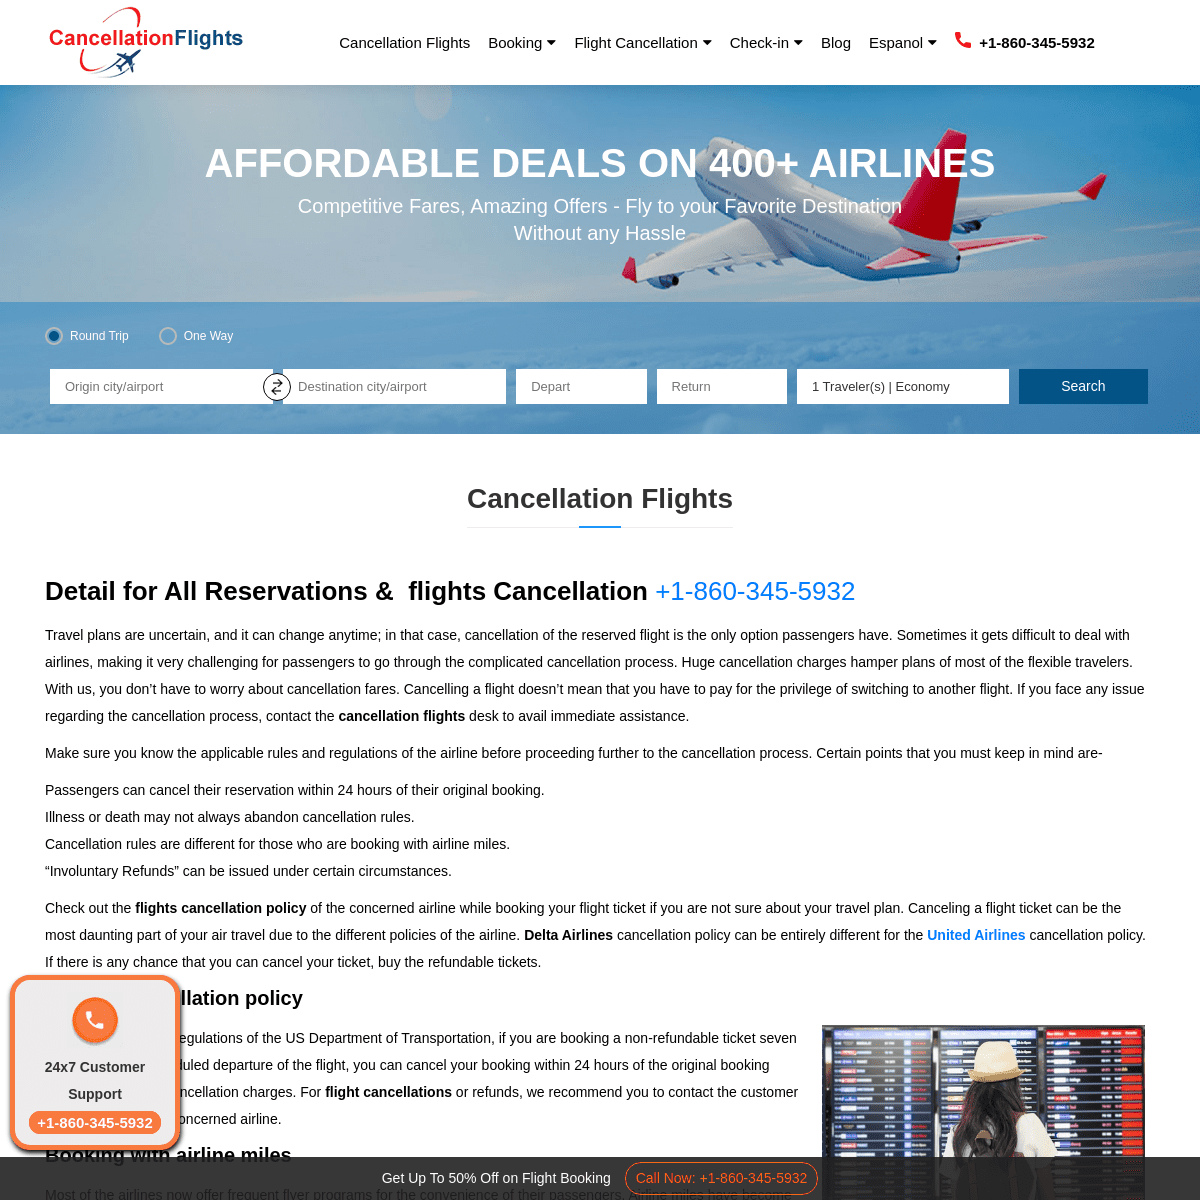 A complete backup of https://cancellationflights.com